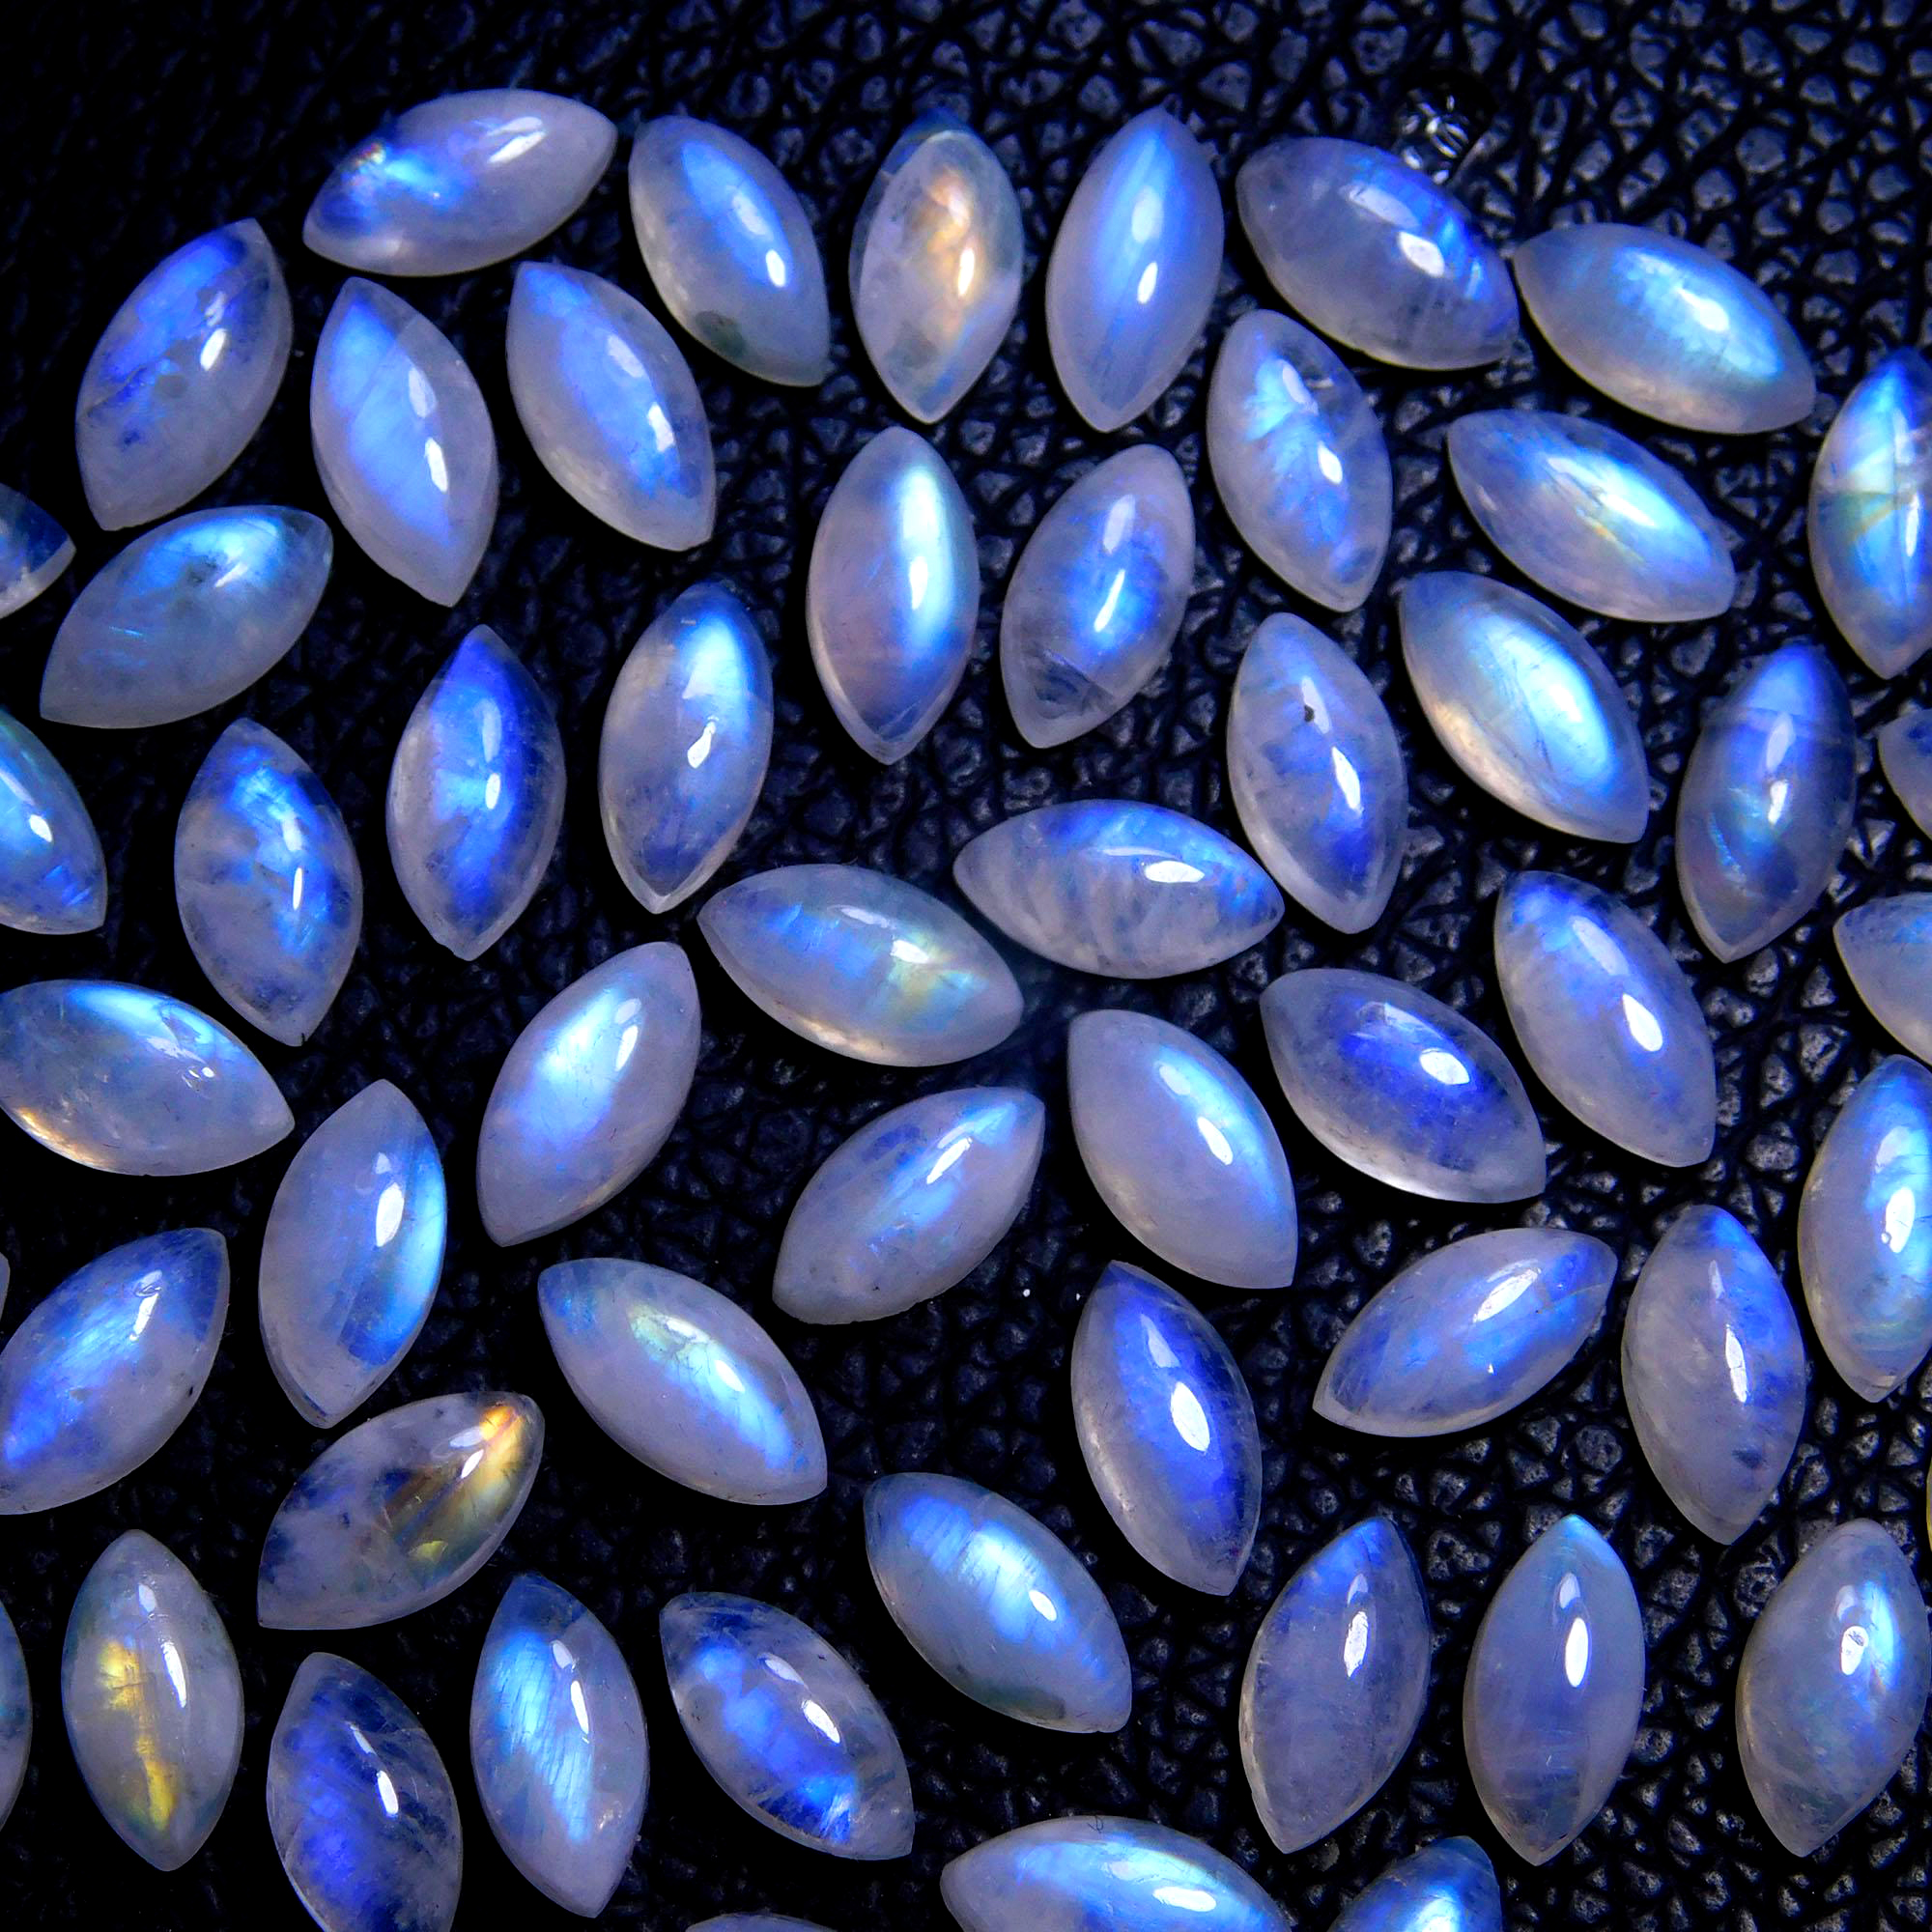 60Pcs 90Cts Natural Rainbow Moonstone Marquise Shape Blue Fire Cabochon Lot Semi Precious Loose Gemstone Jewelry Supply Crystal 10X5mm#9901